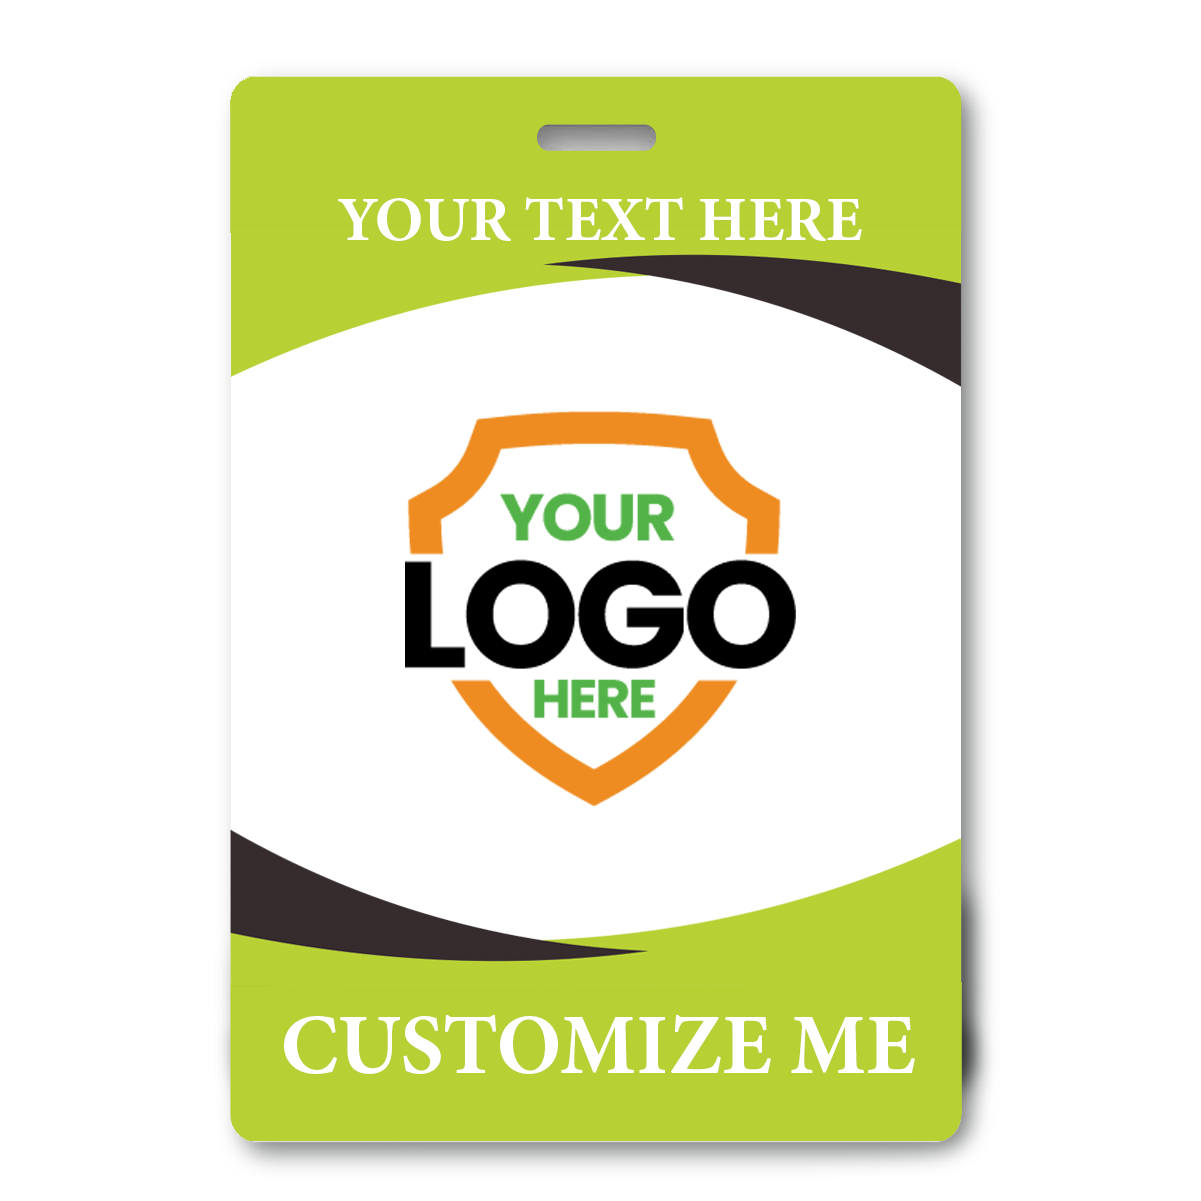 Custom 3x5 Event Badge - Ready for Your Personalization - Add Your Logo, Qr Code, Event Date and More